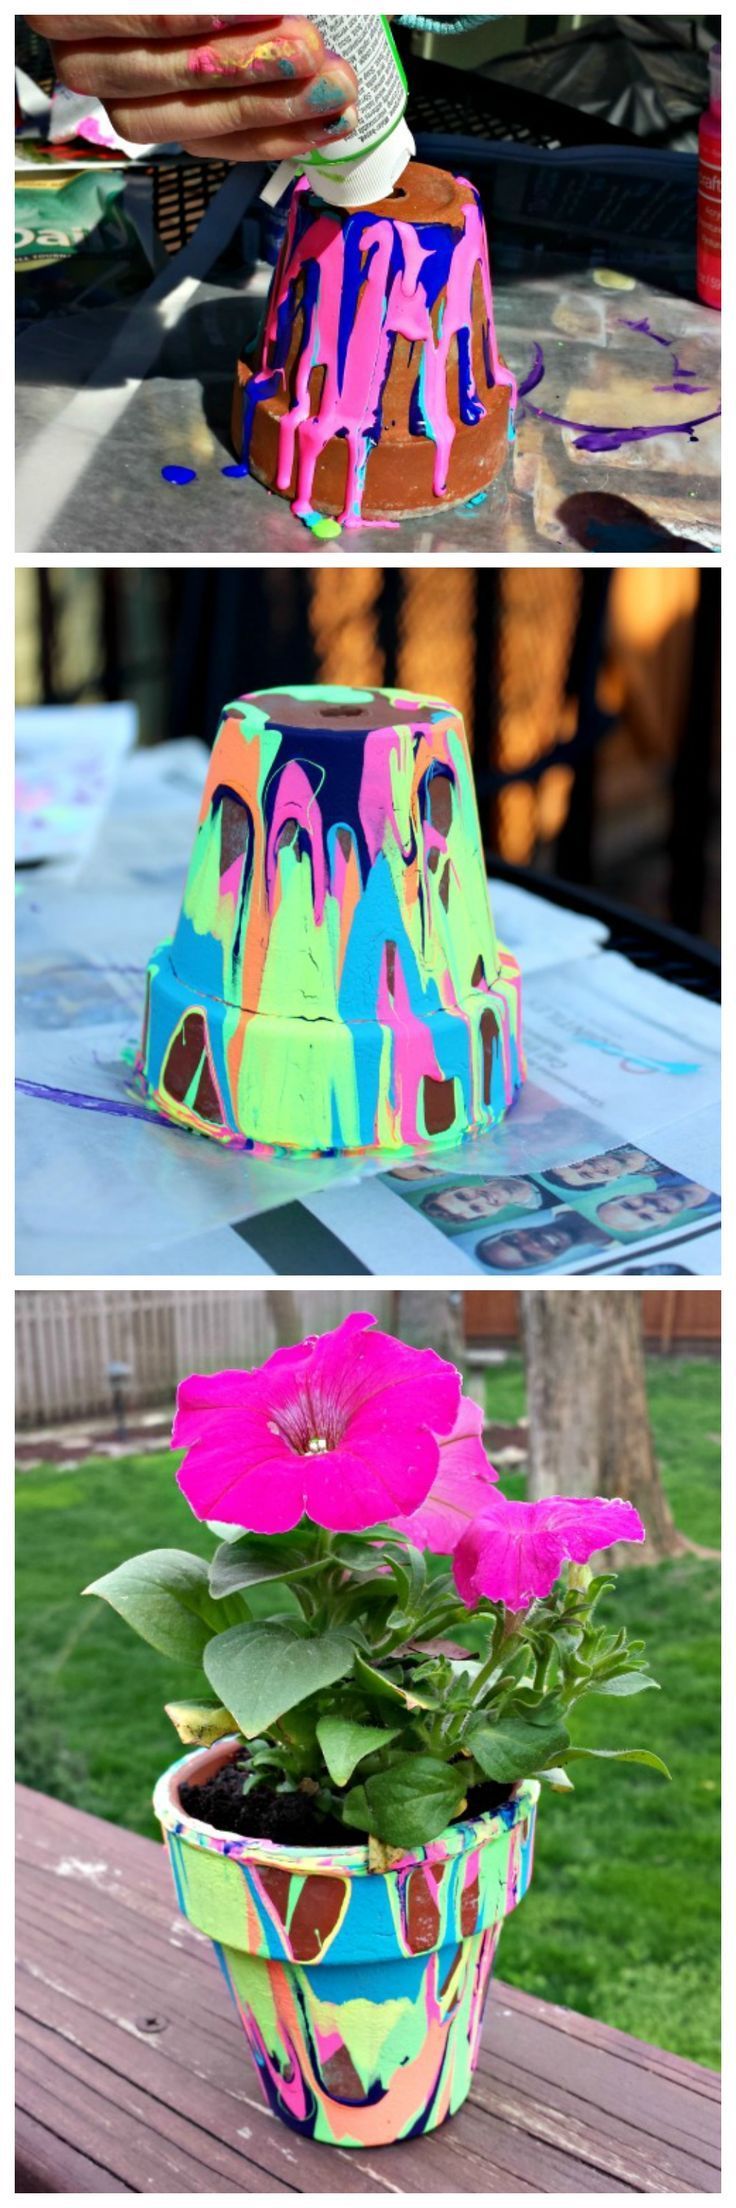 Perfect for Mother’s Day or end-of-year teacher’s gift – rainbow painted pour pots! Would be so fun to do outside with your class